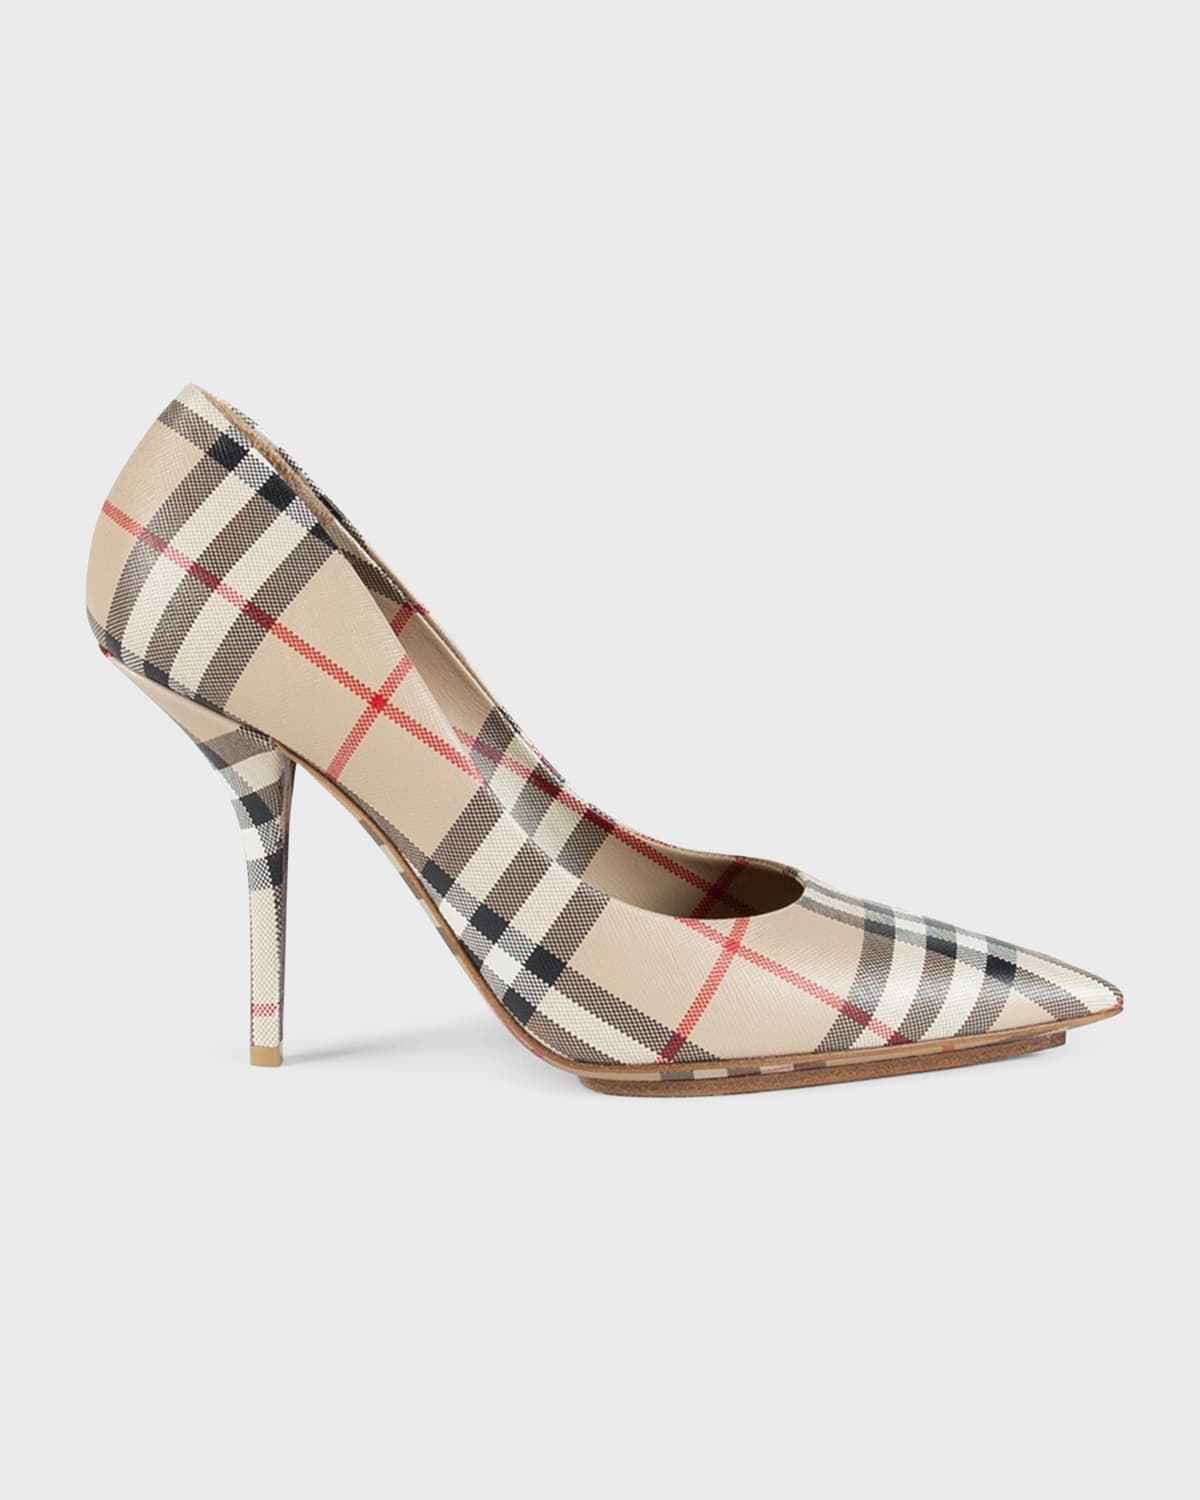 CN Burberry Check White Pumps Shoes 11898, 60% OFF